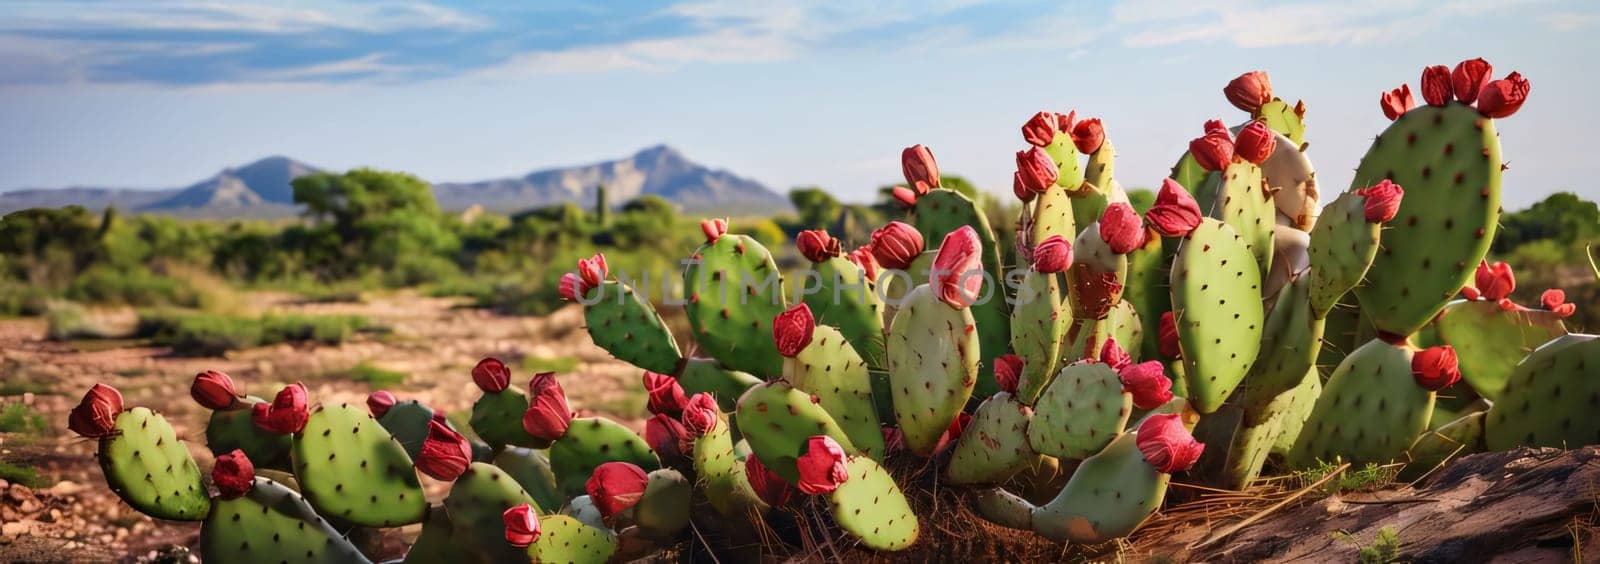 Plant called Cactus: Opuntia cactus with red flowers in the Arizona desert.